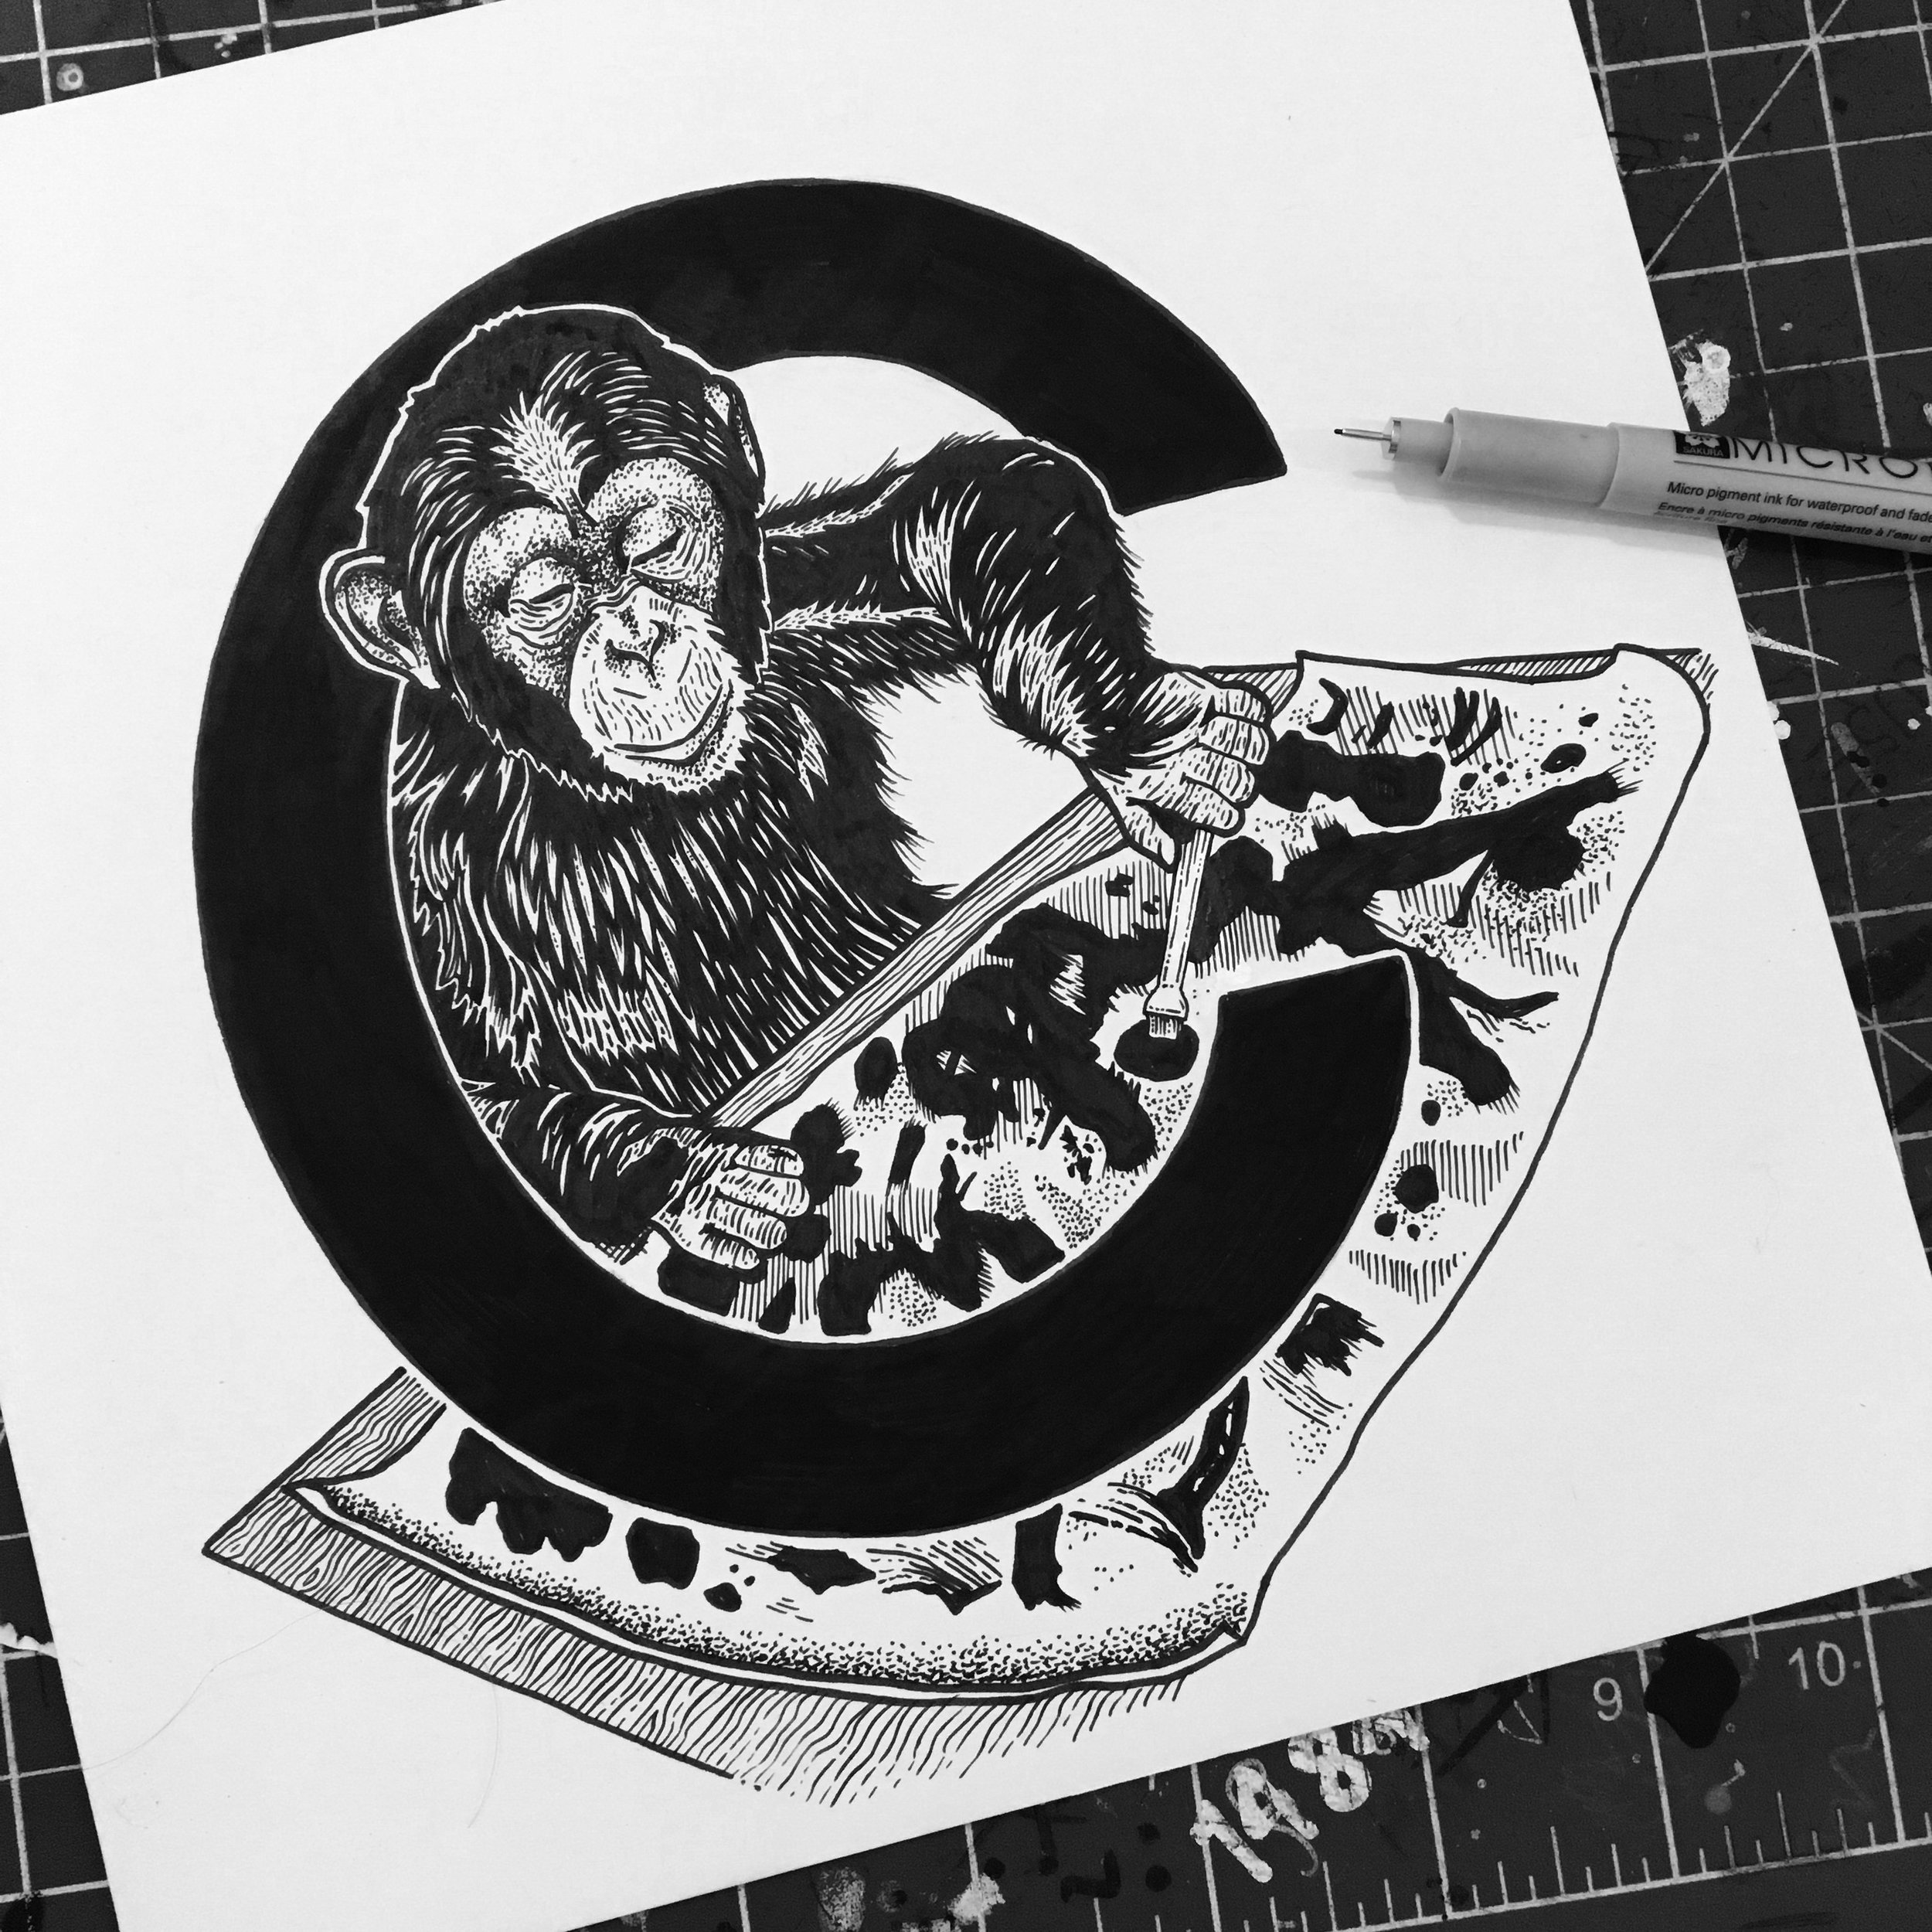  Congo the Chimpanzee - famous for being able to draw and paint.  